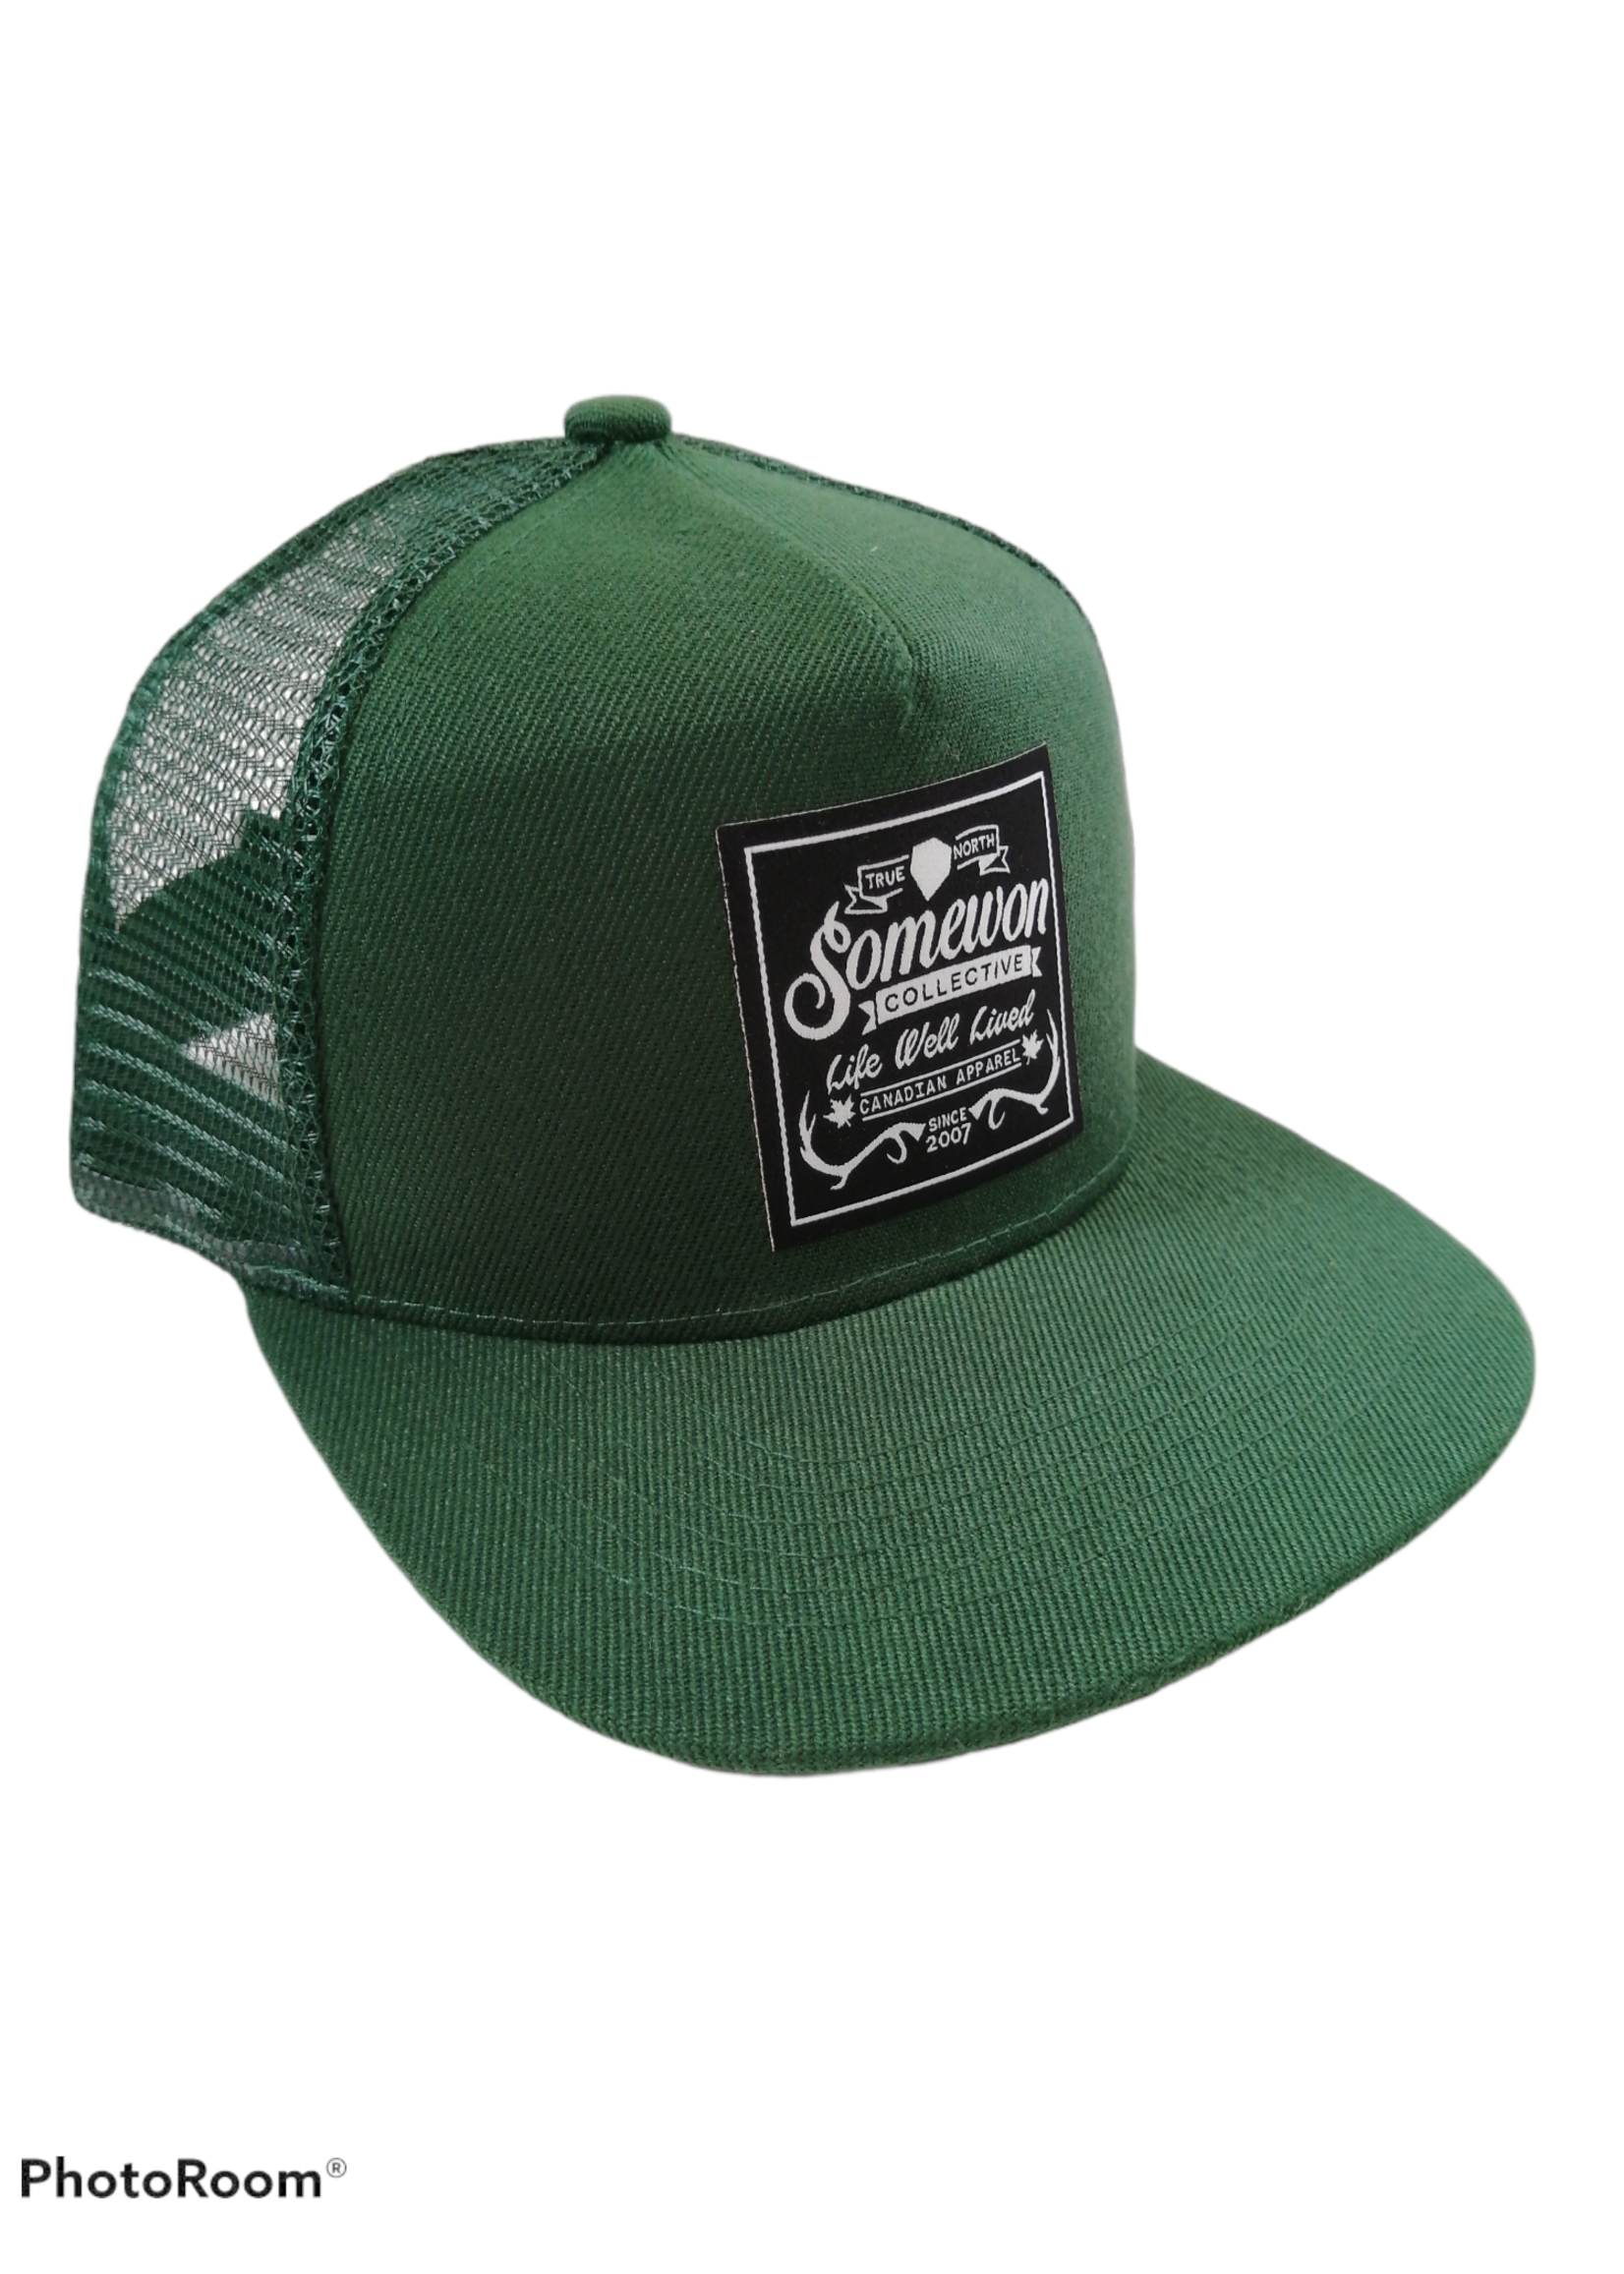 Somewon Collective SomewonCollective - Kids Trucker (Green)